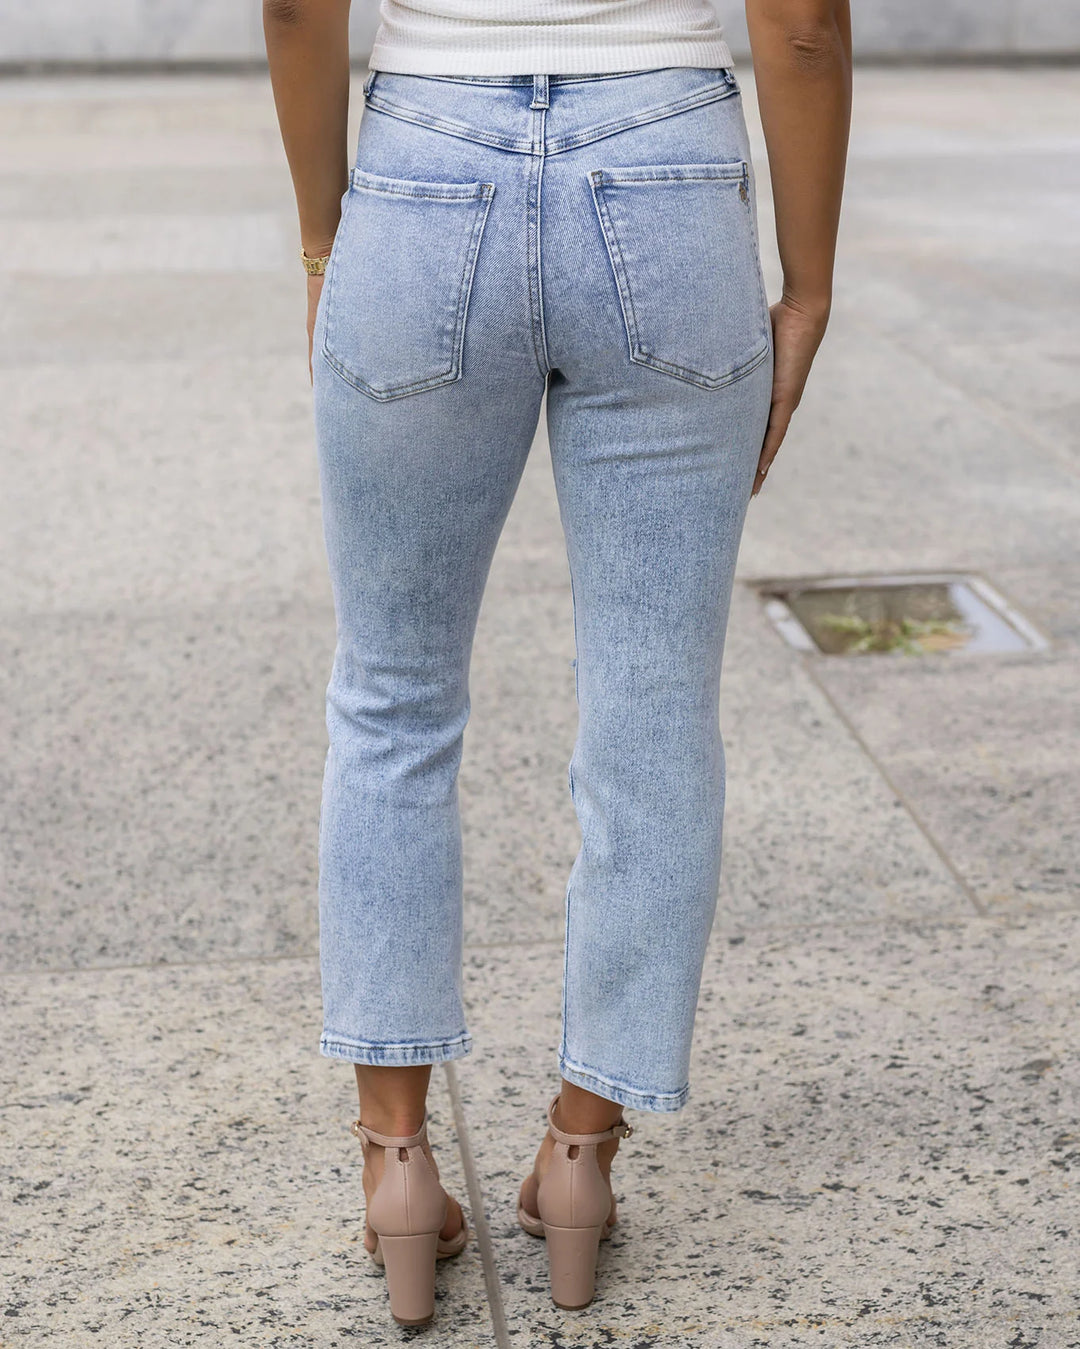 Grace and Lace | Premium Denim High Waisted Mom Jeans | DISTRESSED LIGHT MID WASH